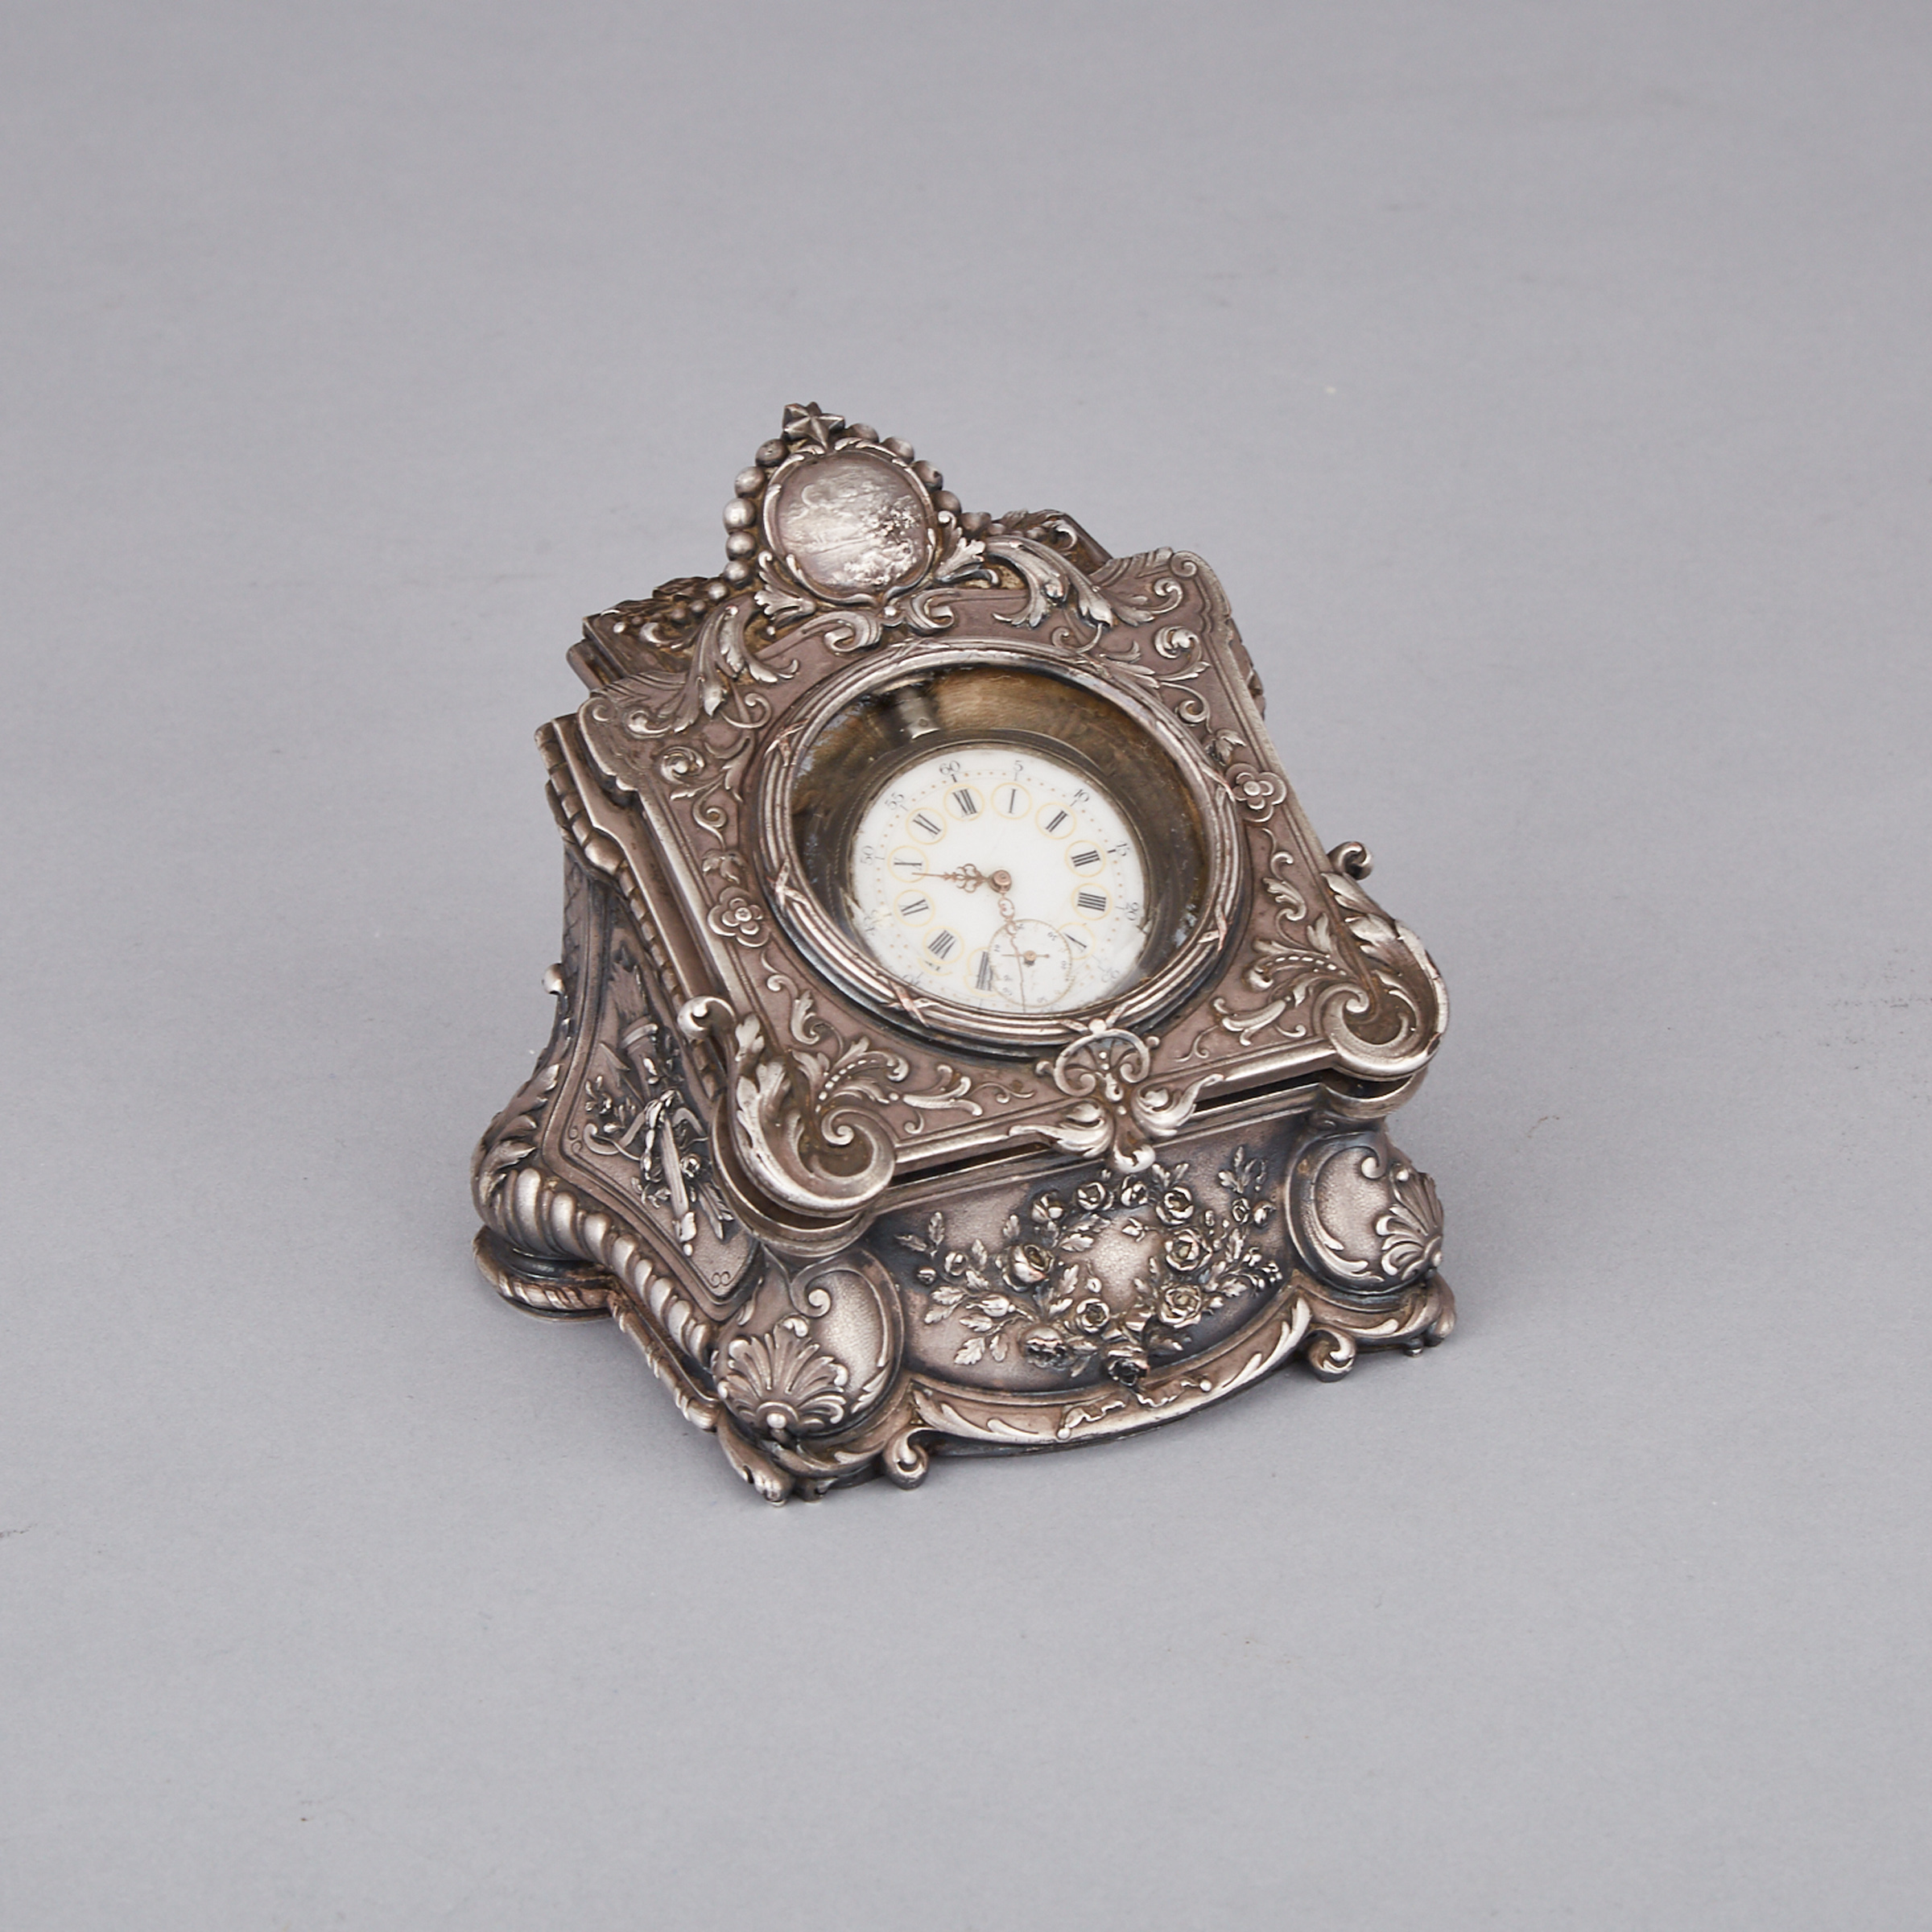 Napoleon III Silver Plated Pocket Watch Desk Stand, Leopold Oudry et Cie, with Silver Pocket Watch, late 19th century